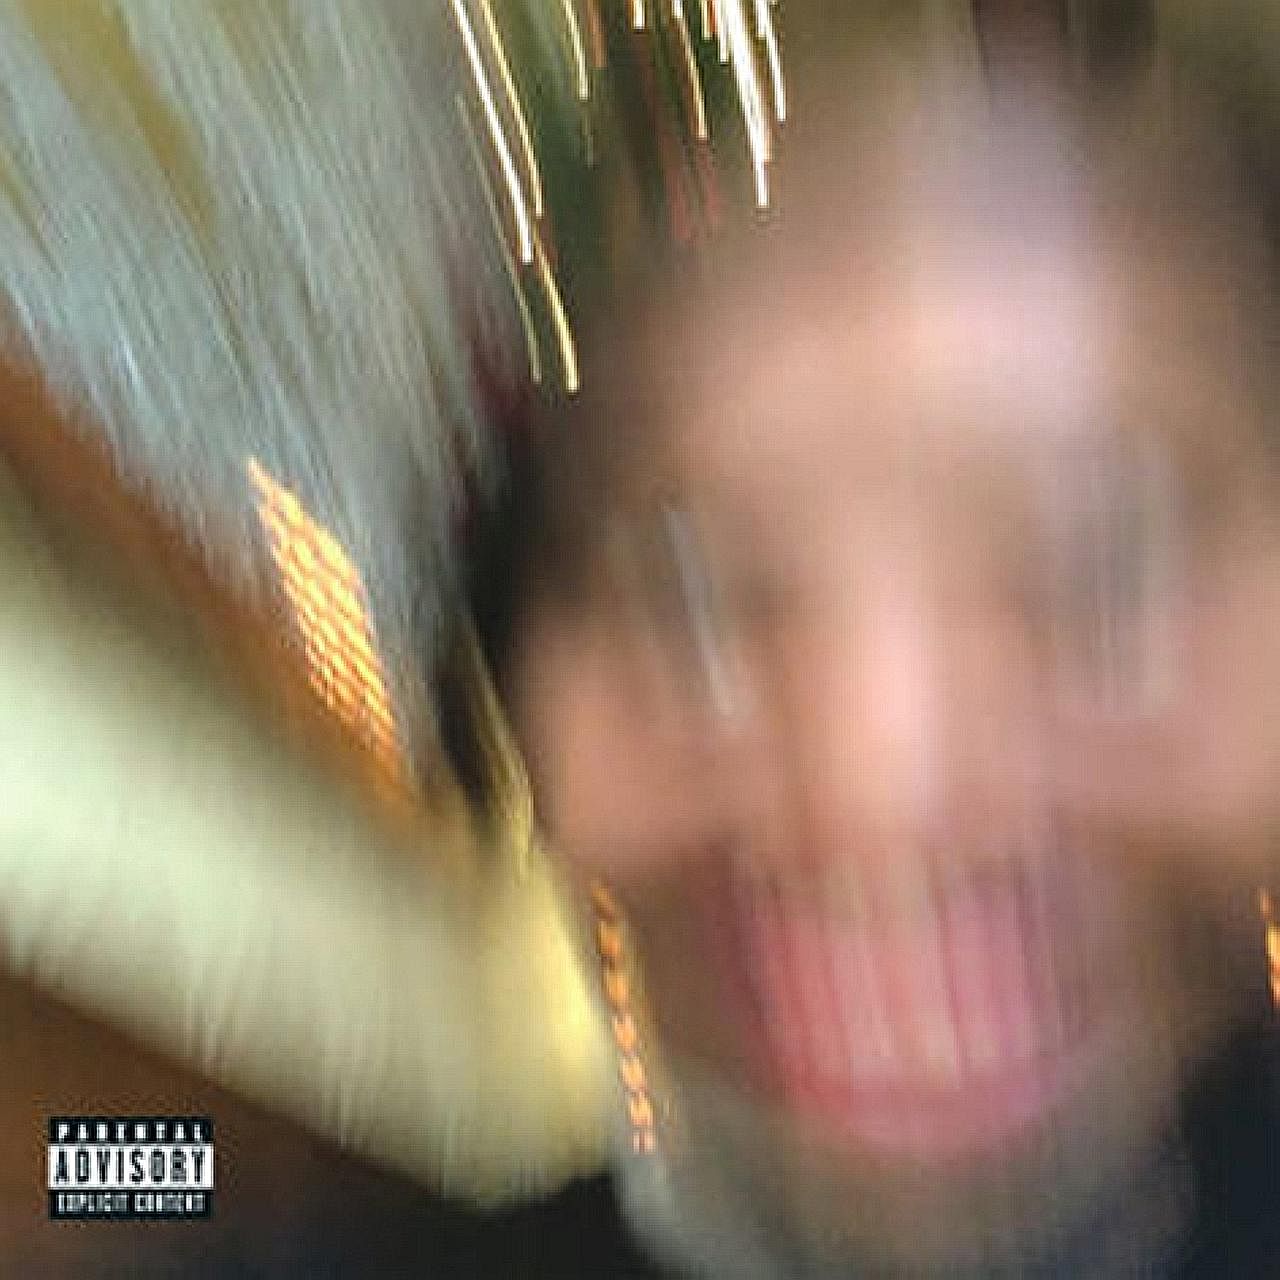 Some Rap Songs by rapper Earl Sweatshirt (above) offers a captivating blend of avant-garde jazz, hip-hop and missives.